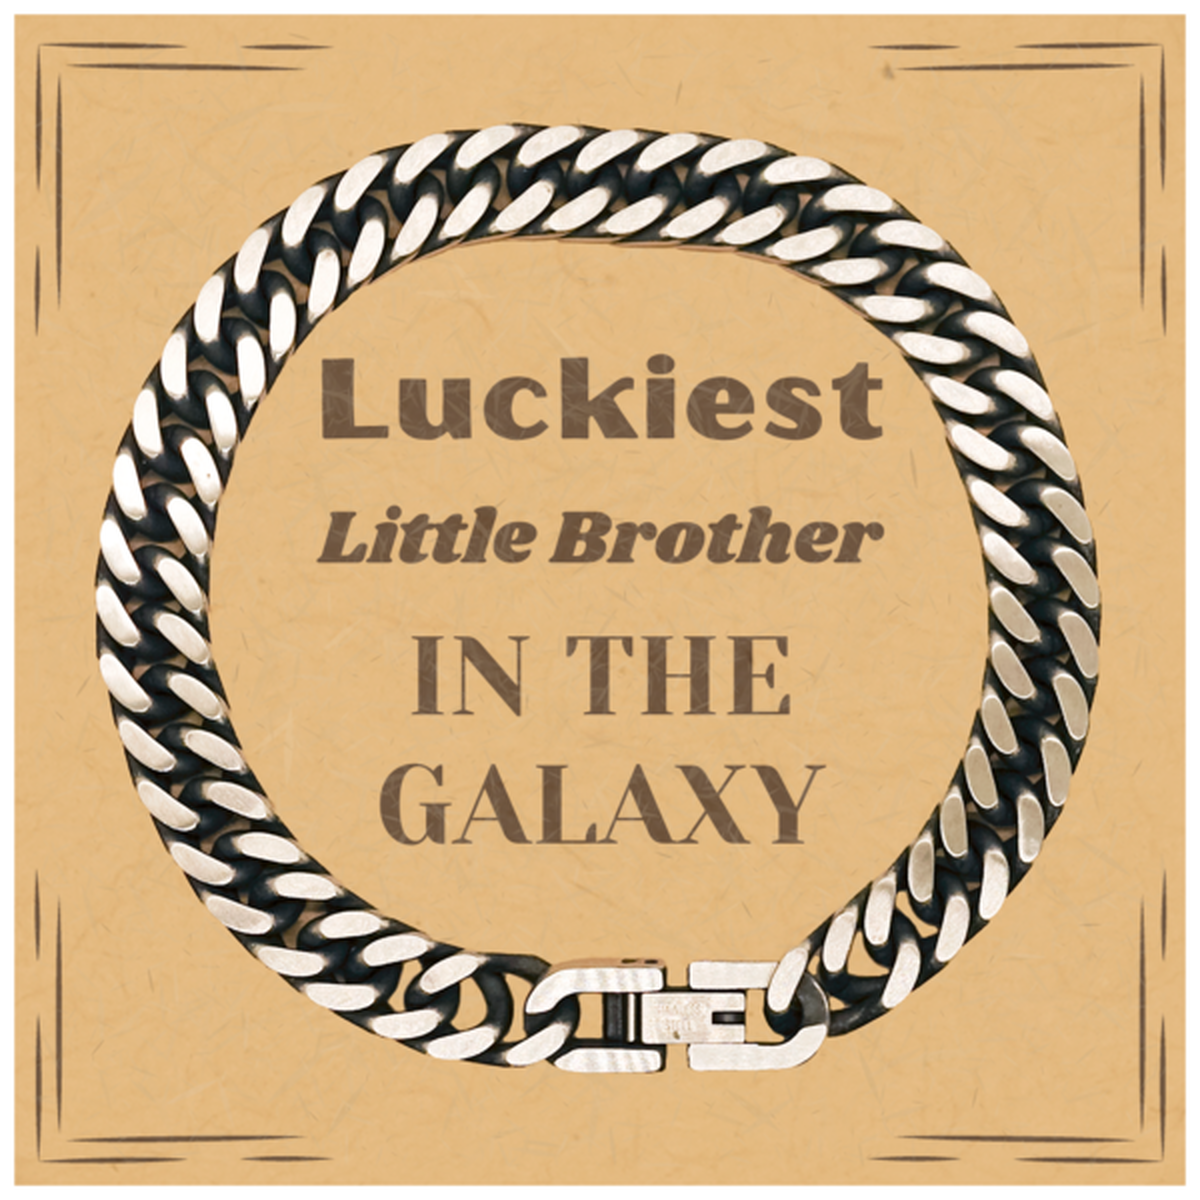 Luckiest Little Brother in the Galaxy, To My Little Brother Message Card Gifts, Christmas Little Brother Cuban Link Chain Bracelet Gifts, X-mas Birthday Unique Gifts For Little Brother Men Women